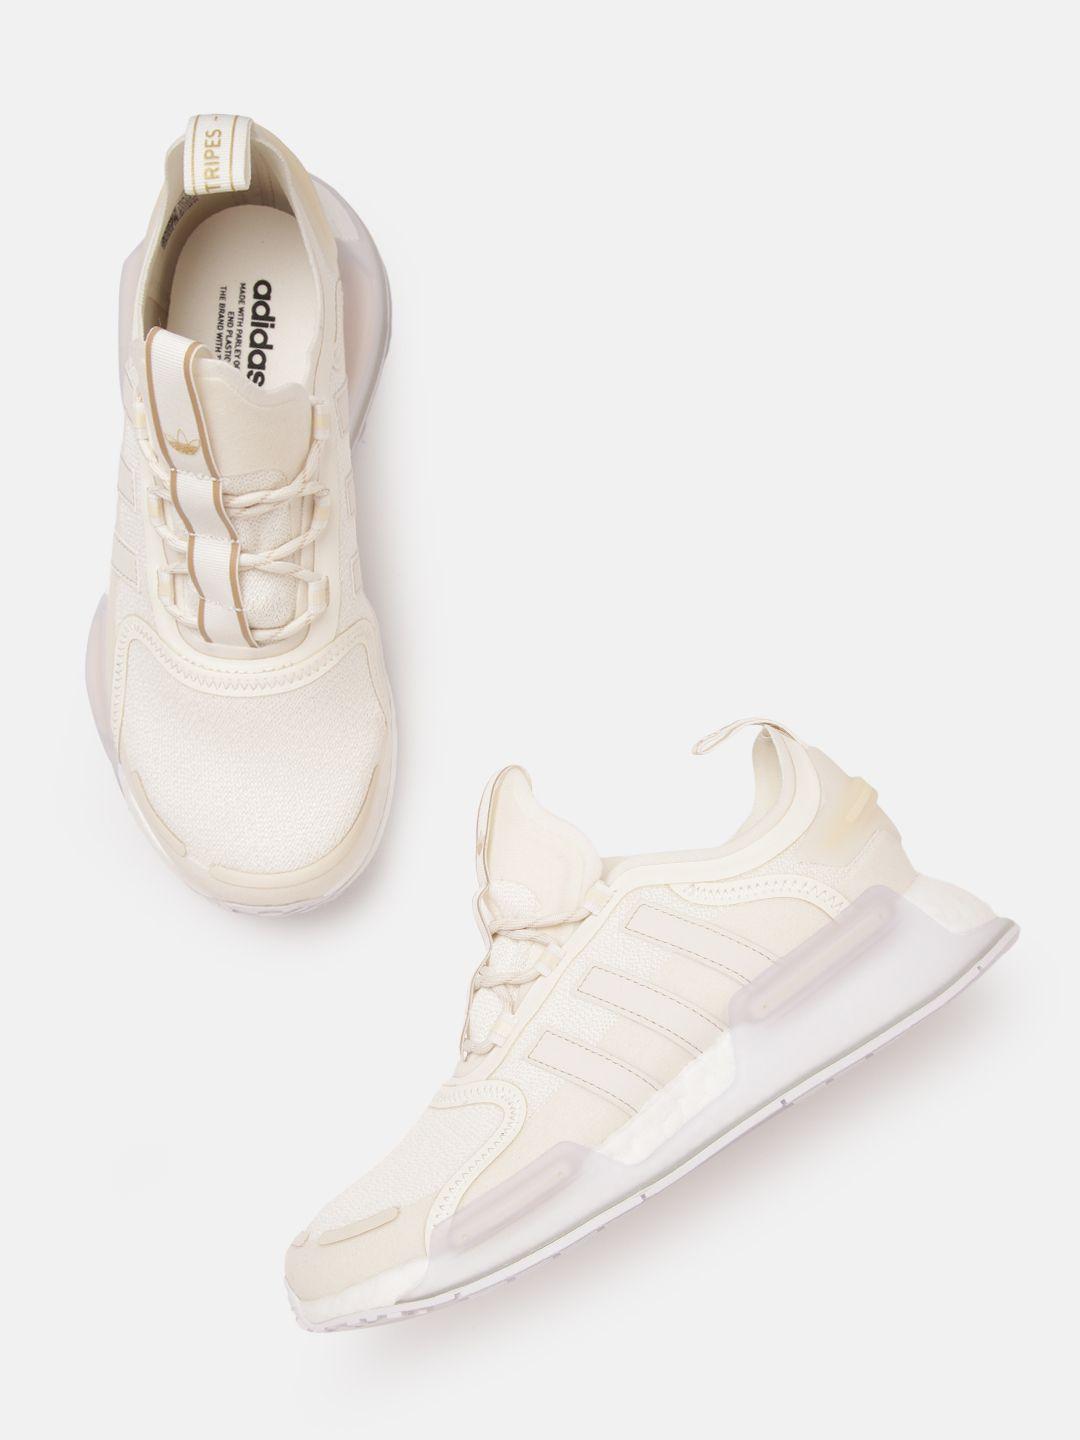 adidas originals women cream-coloured solid woven design nmd_r1 v3 ease sneakers